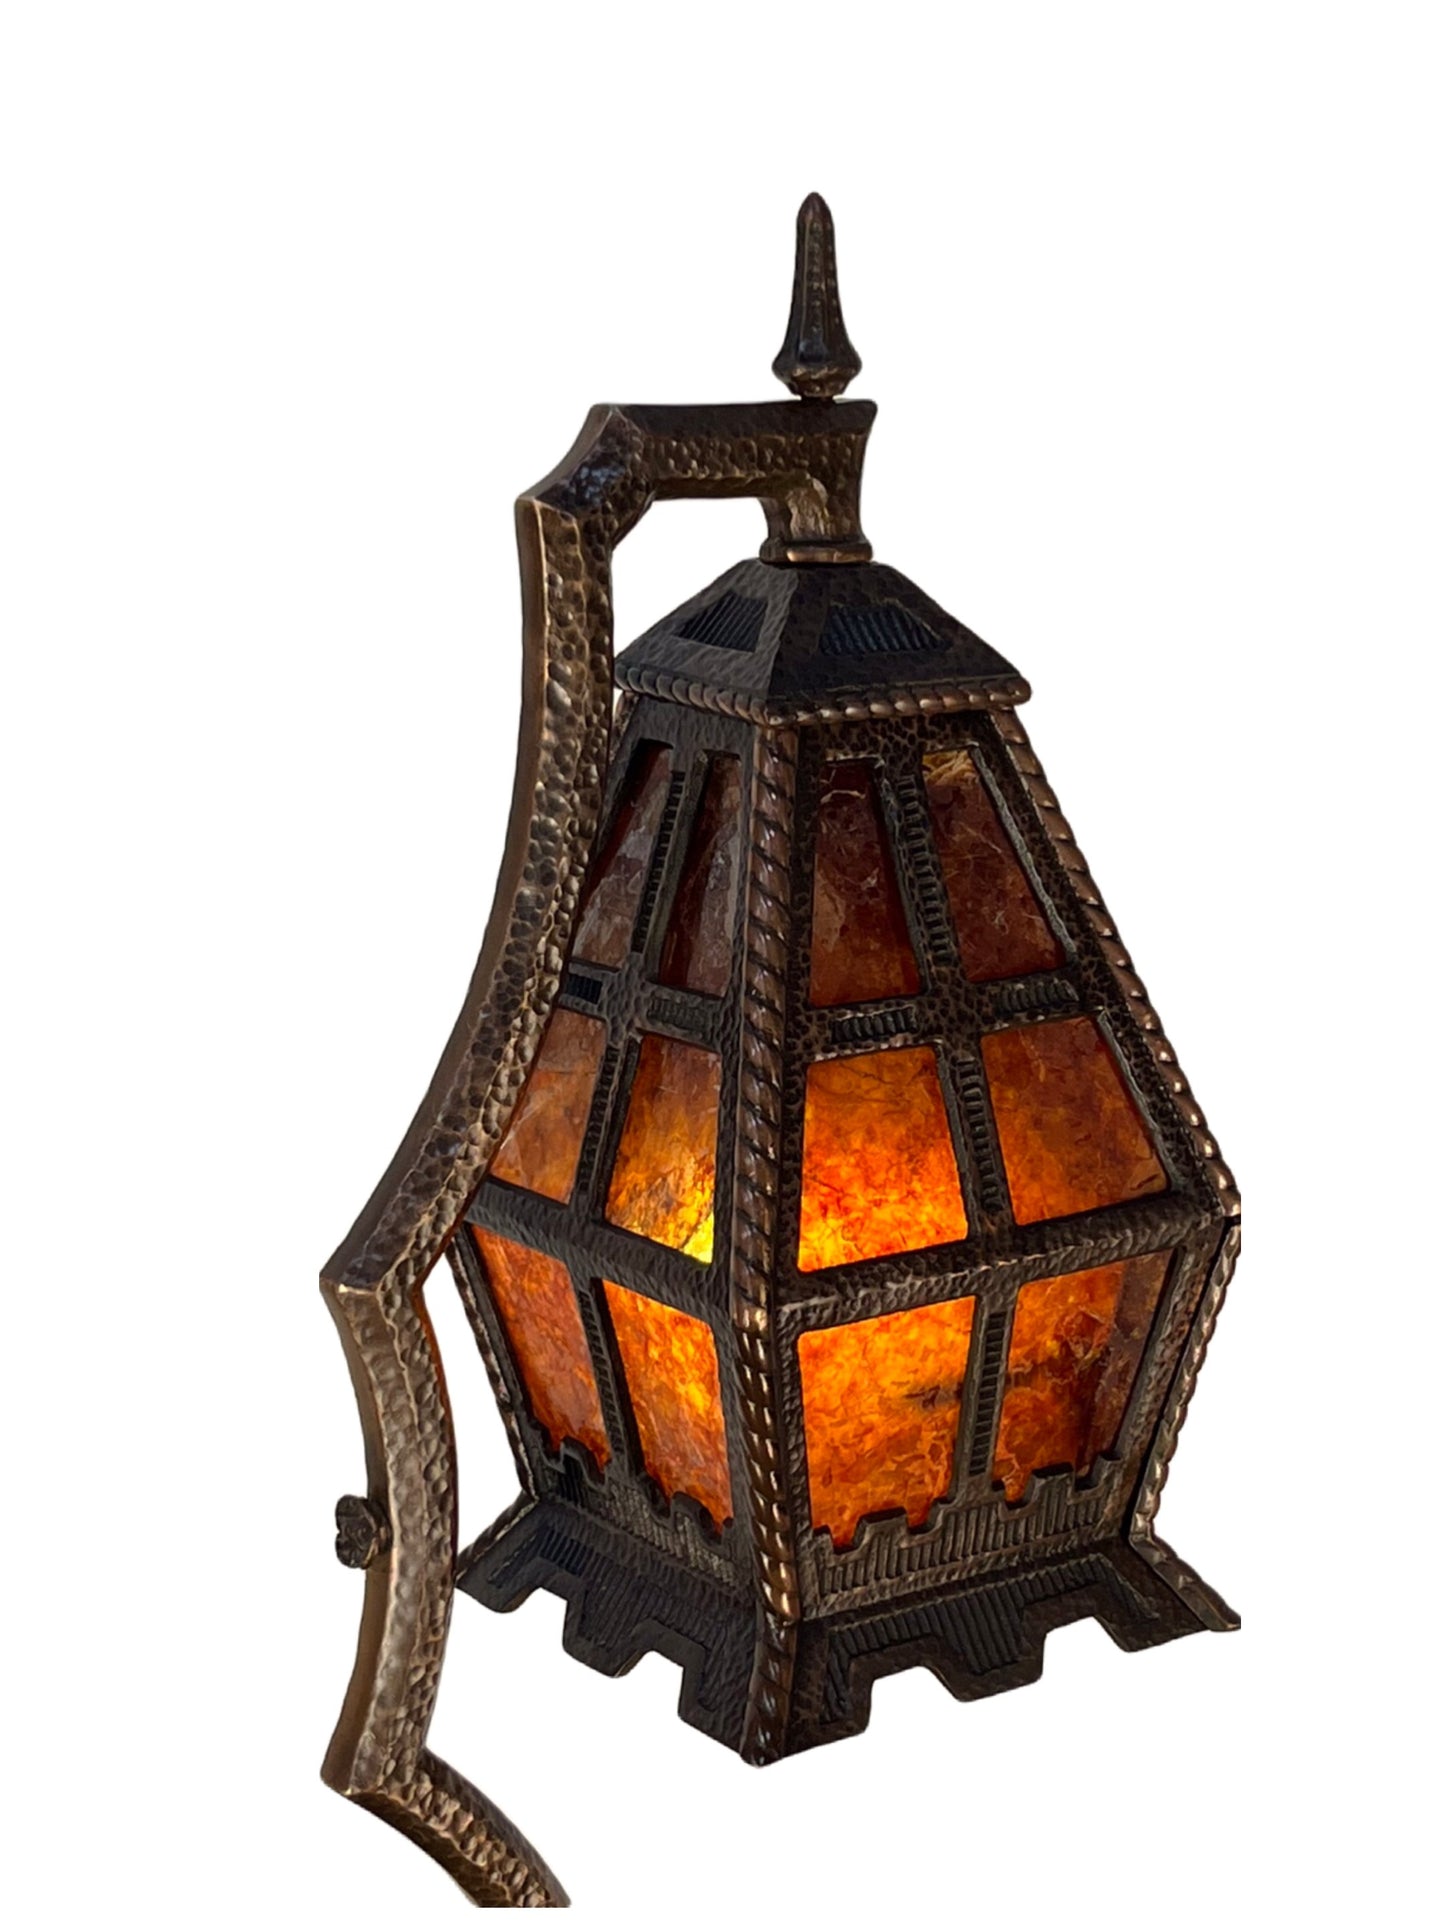 Stunning Hammered Arts and Crafts Floor Lamp with Smoking Accessories #2367